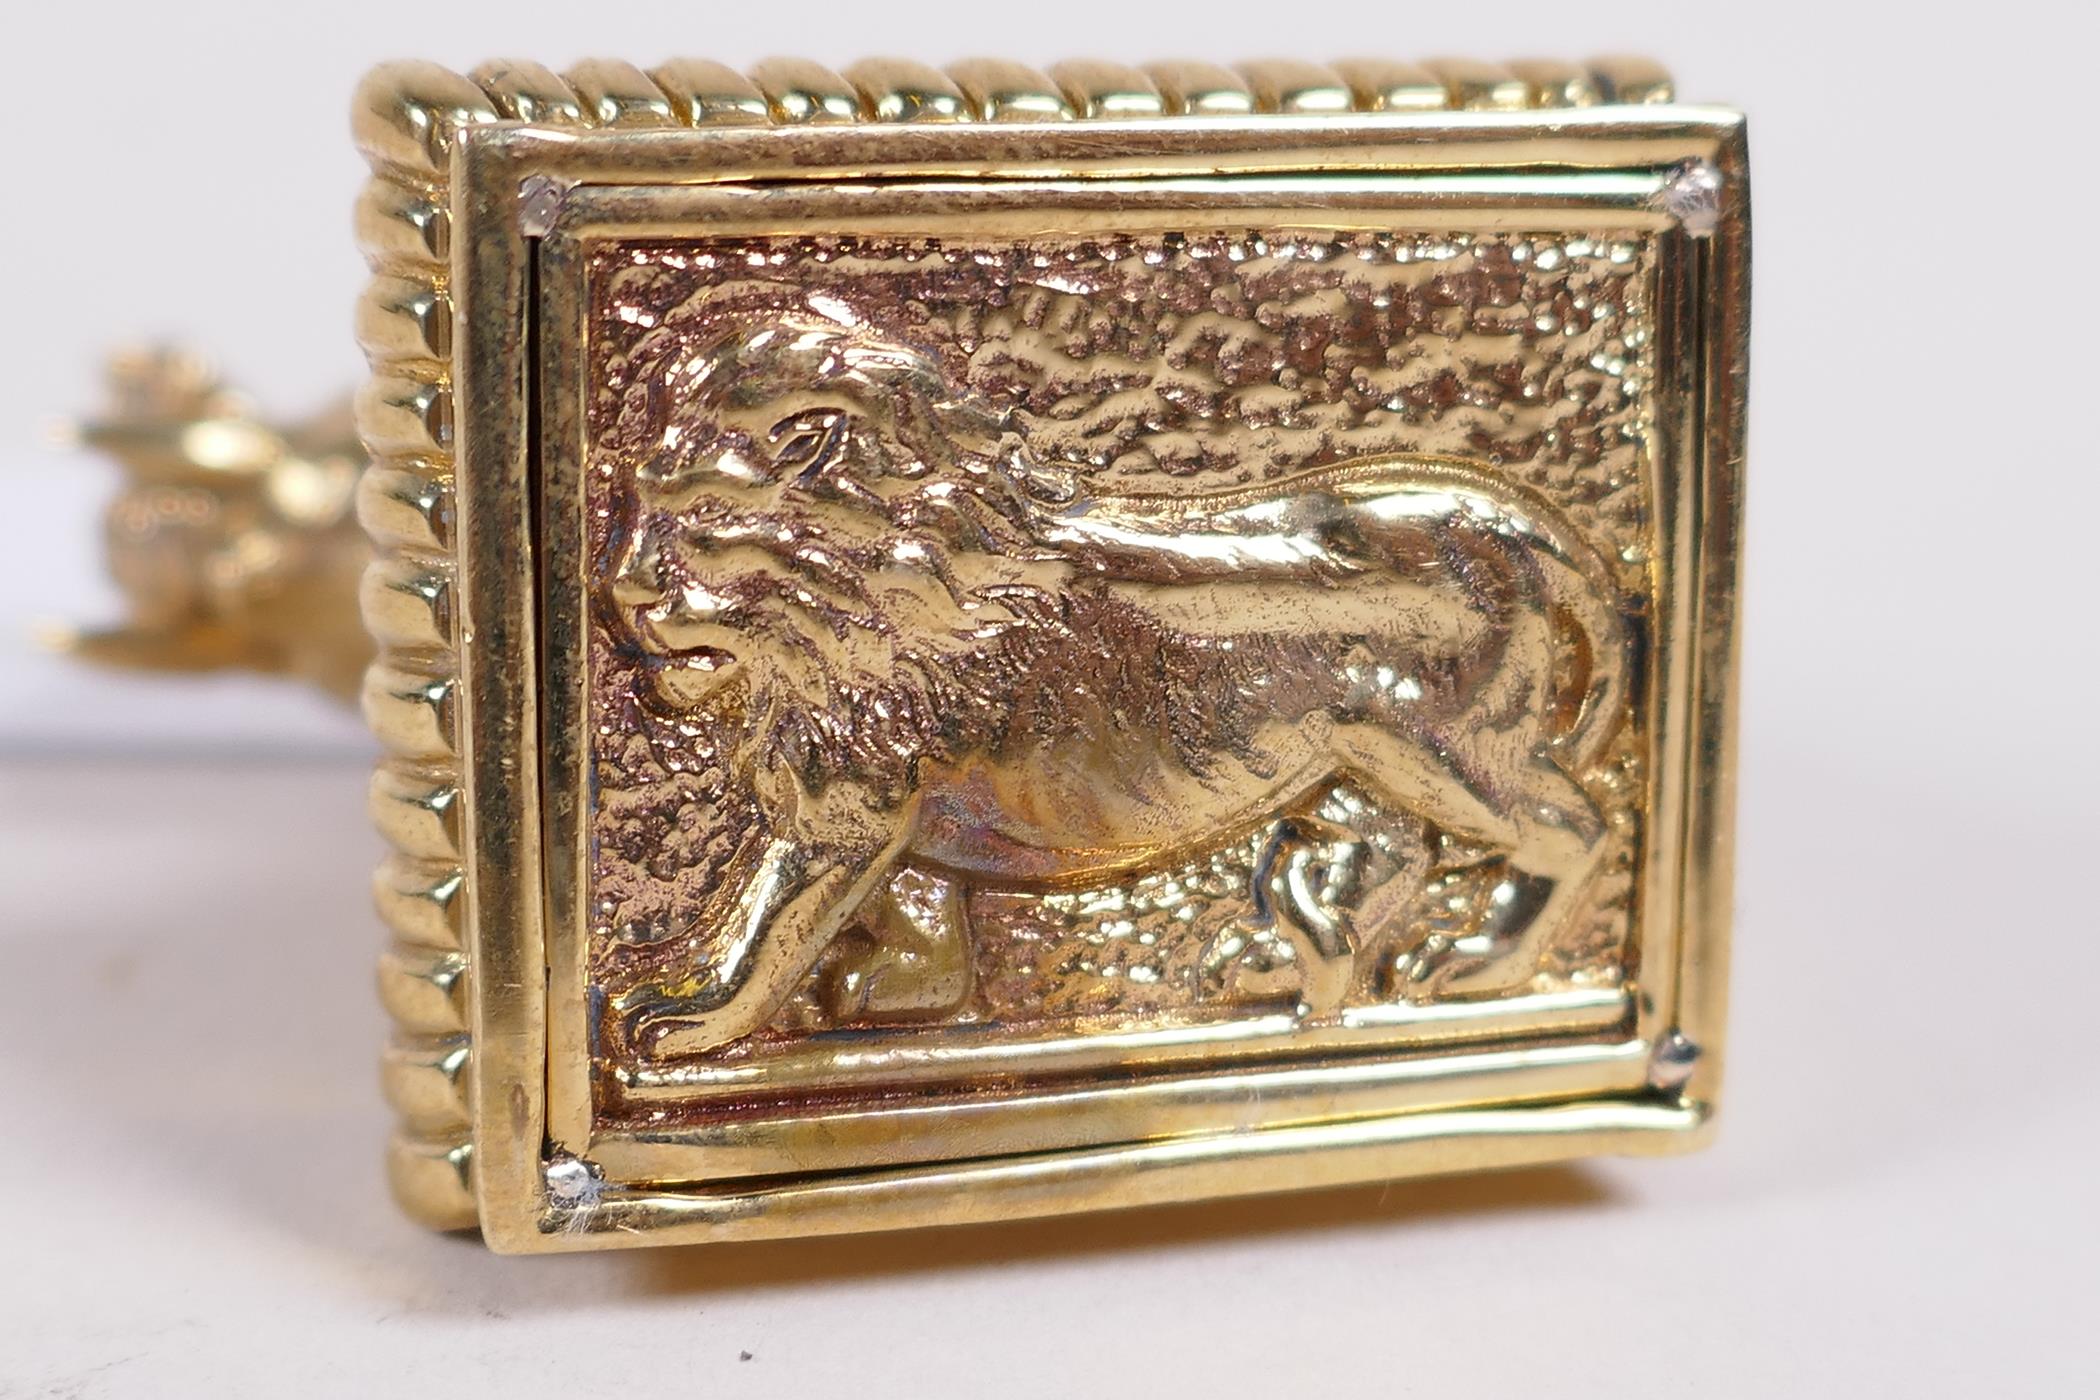 A gilt metal document seal with an elephant handle - Image 2 of 2